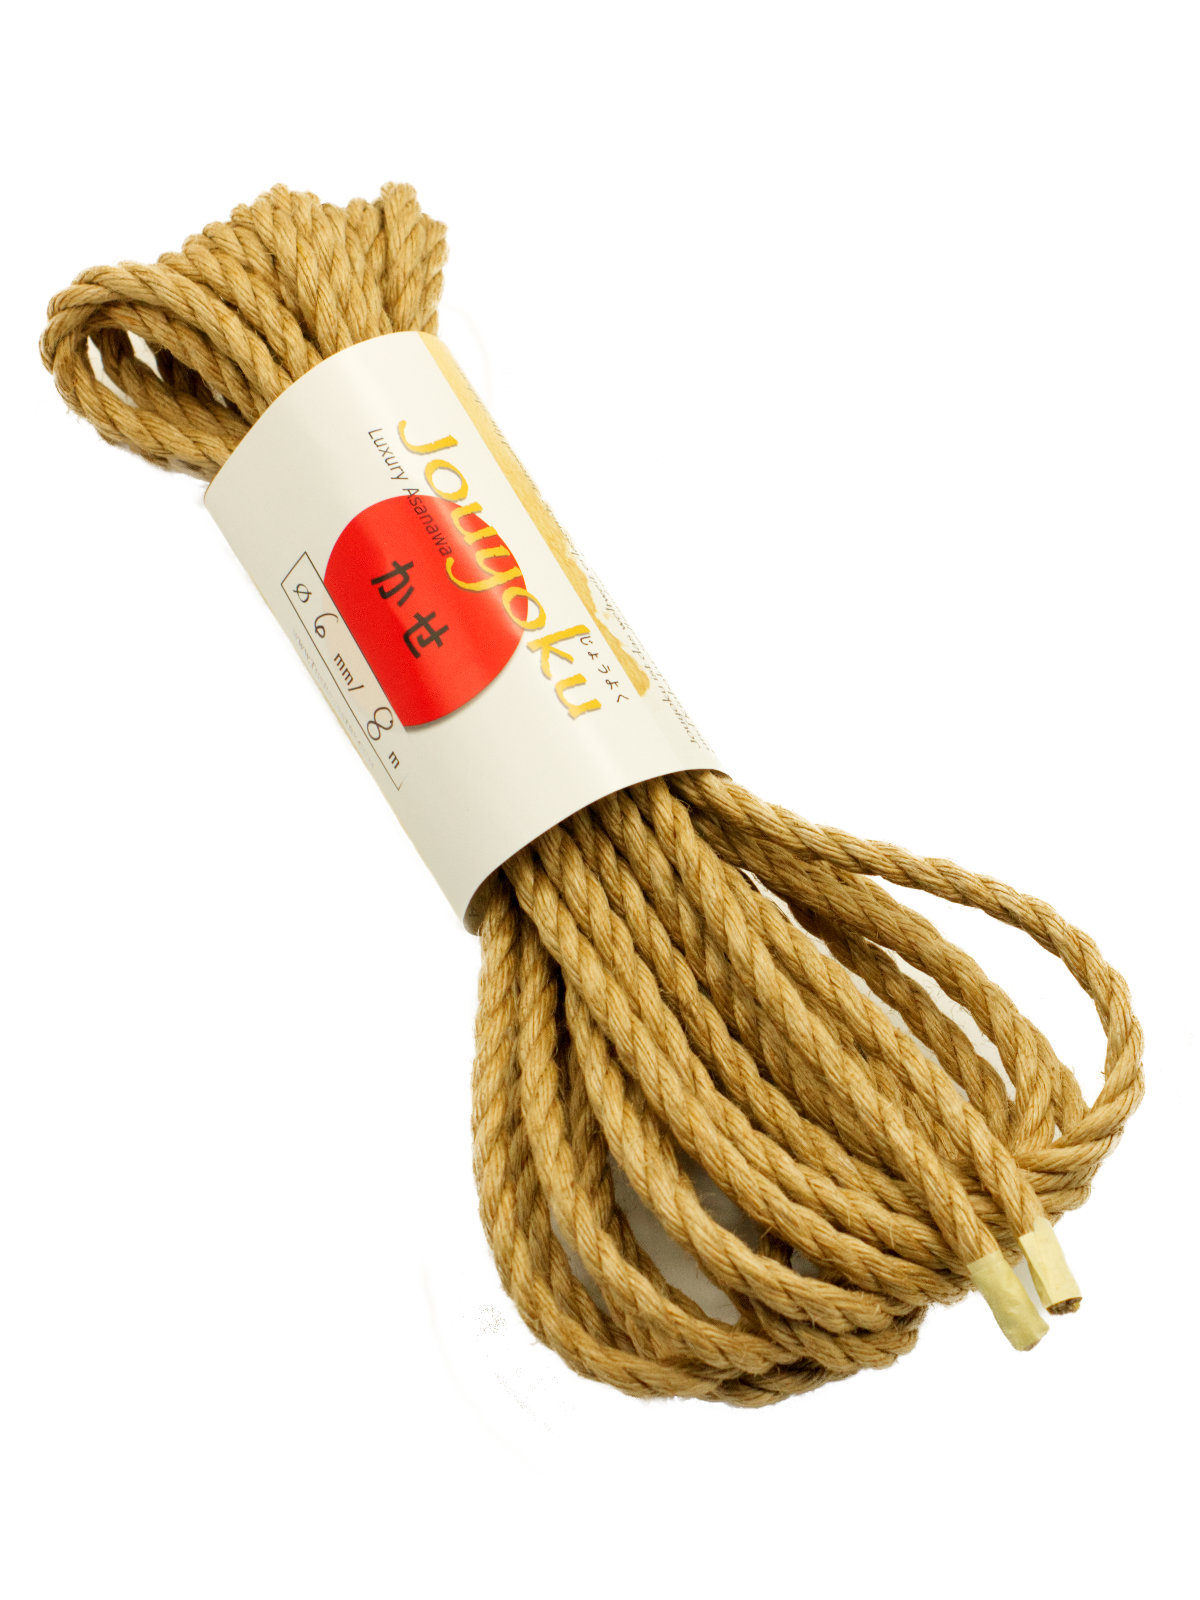 JOUYOKU premium quality jute rope for your tying pleasure, ready-for-use,  0% JBO